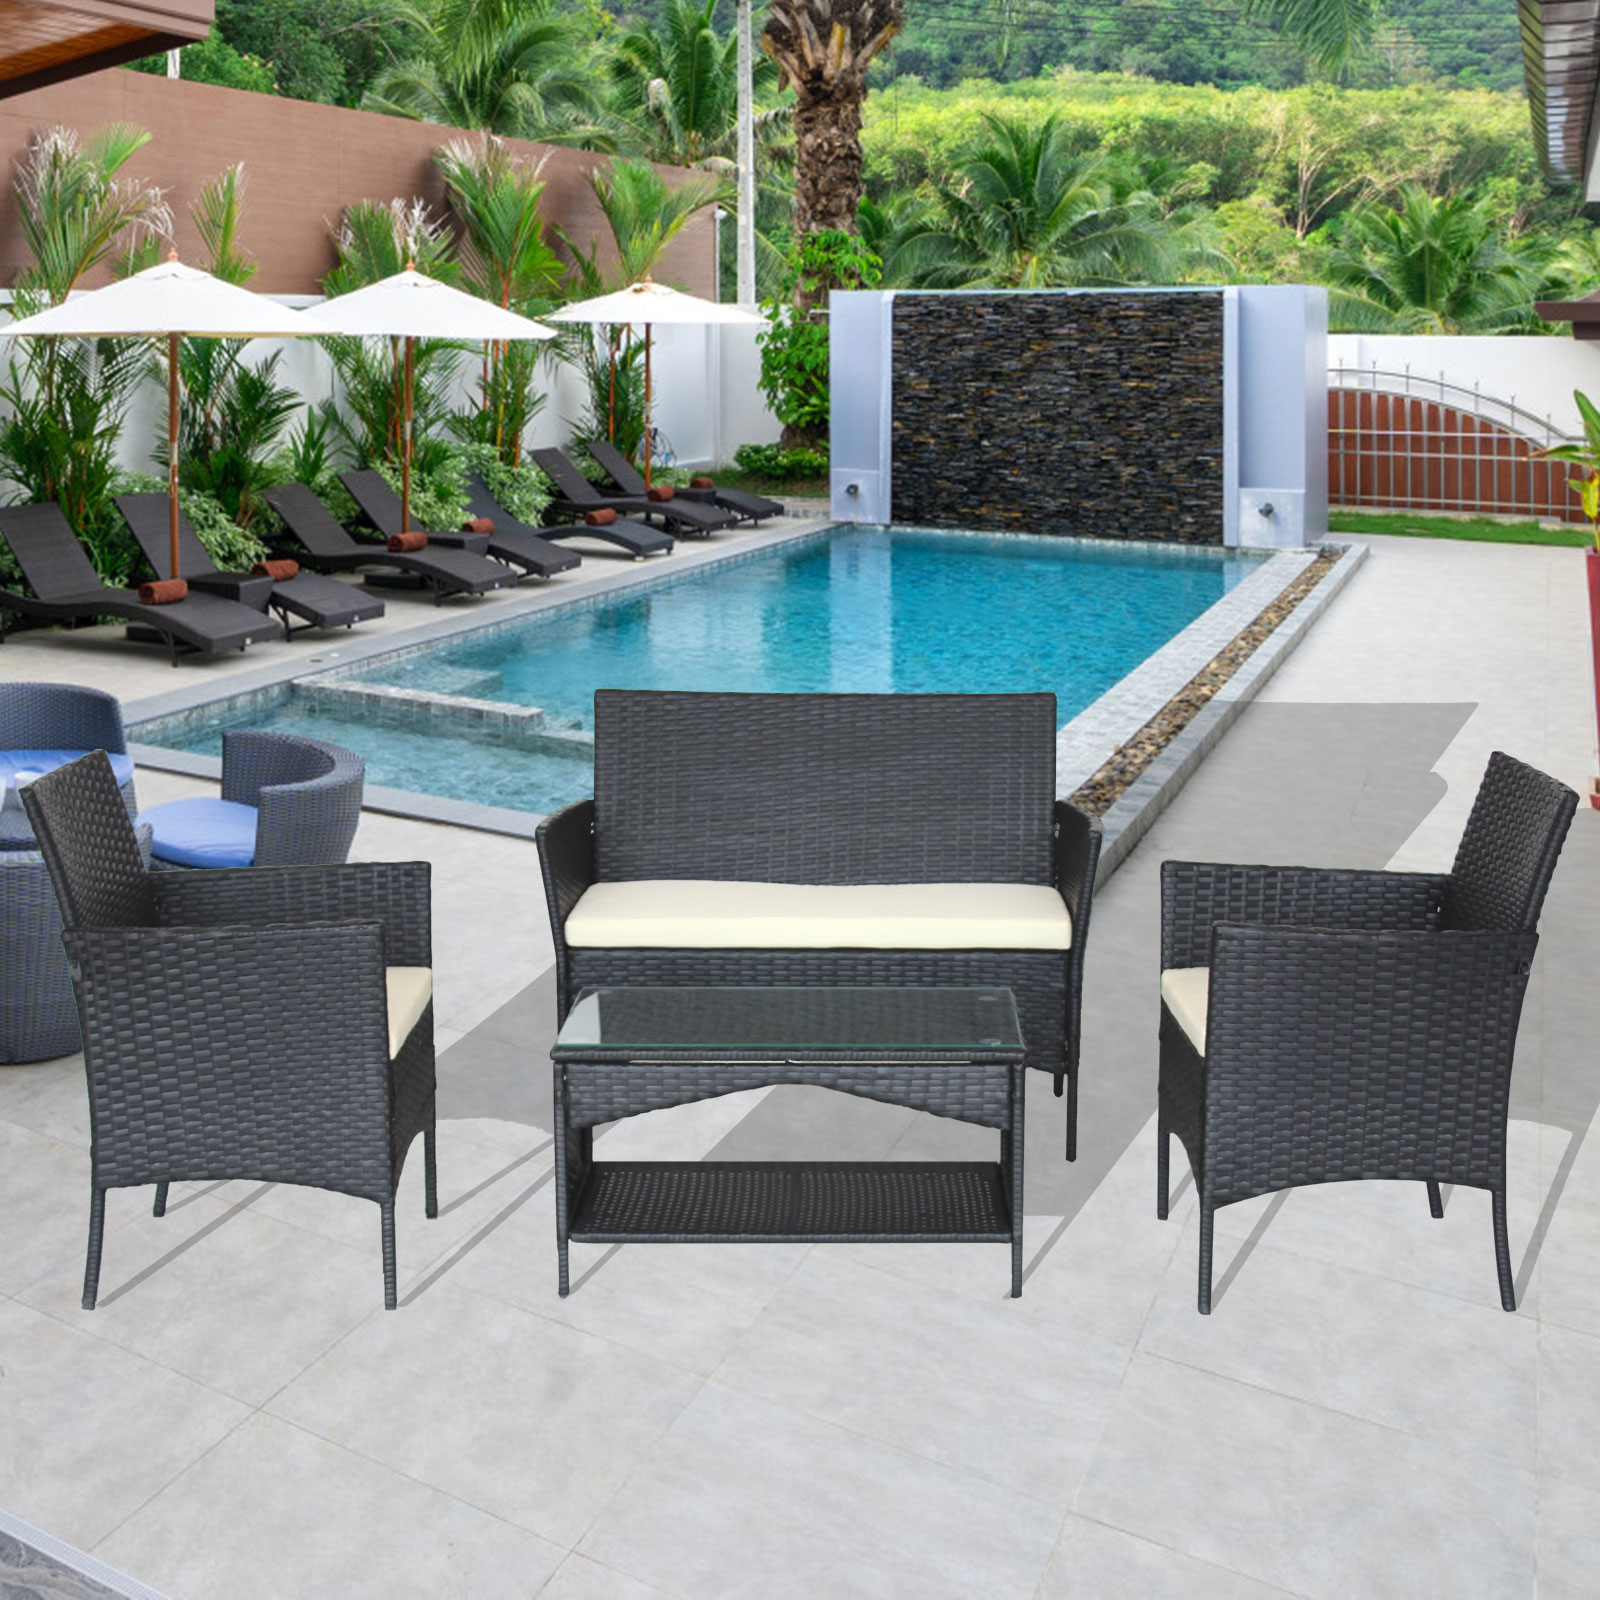 uhomepro Bistro Patio Furniture, 4 Piece Rattan Wicker Outdoor Conversation Sets for Backyard Poolside Garden, 2pcs Arm Chairs, 1pc Love Seat, Coffee Table, Beige Cushion - image 1 of 10